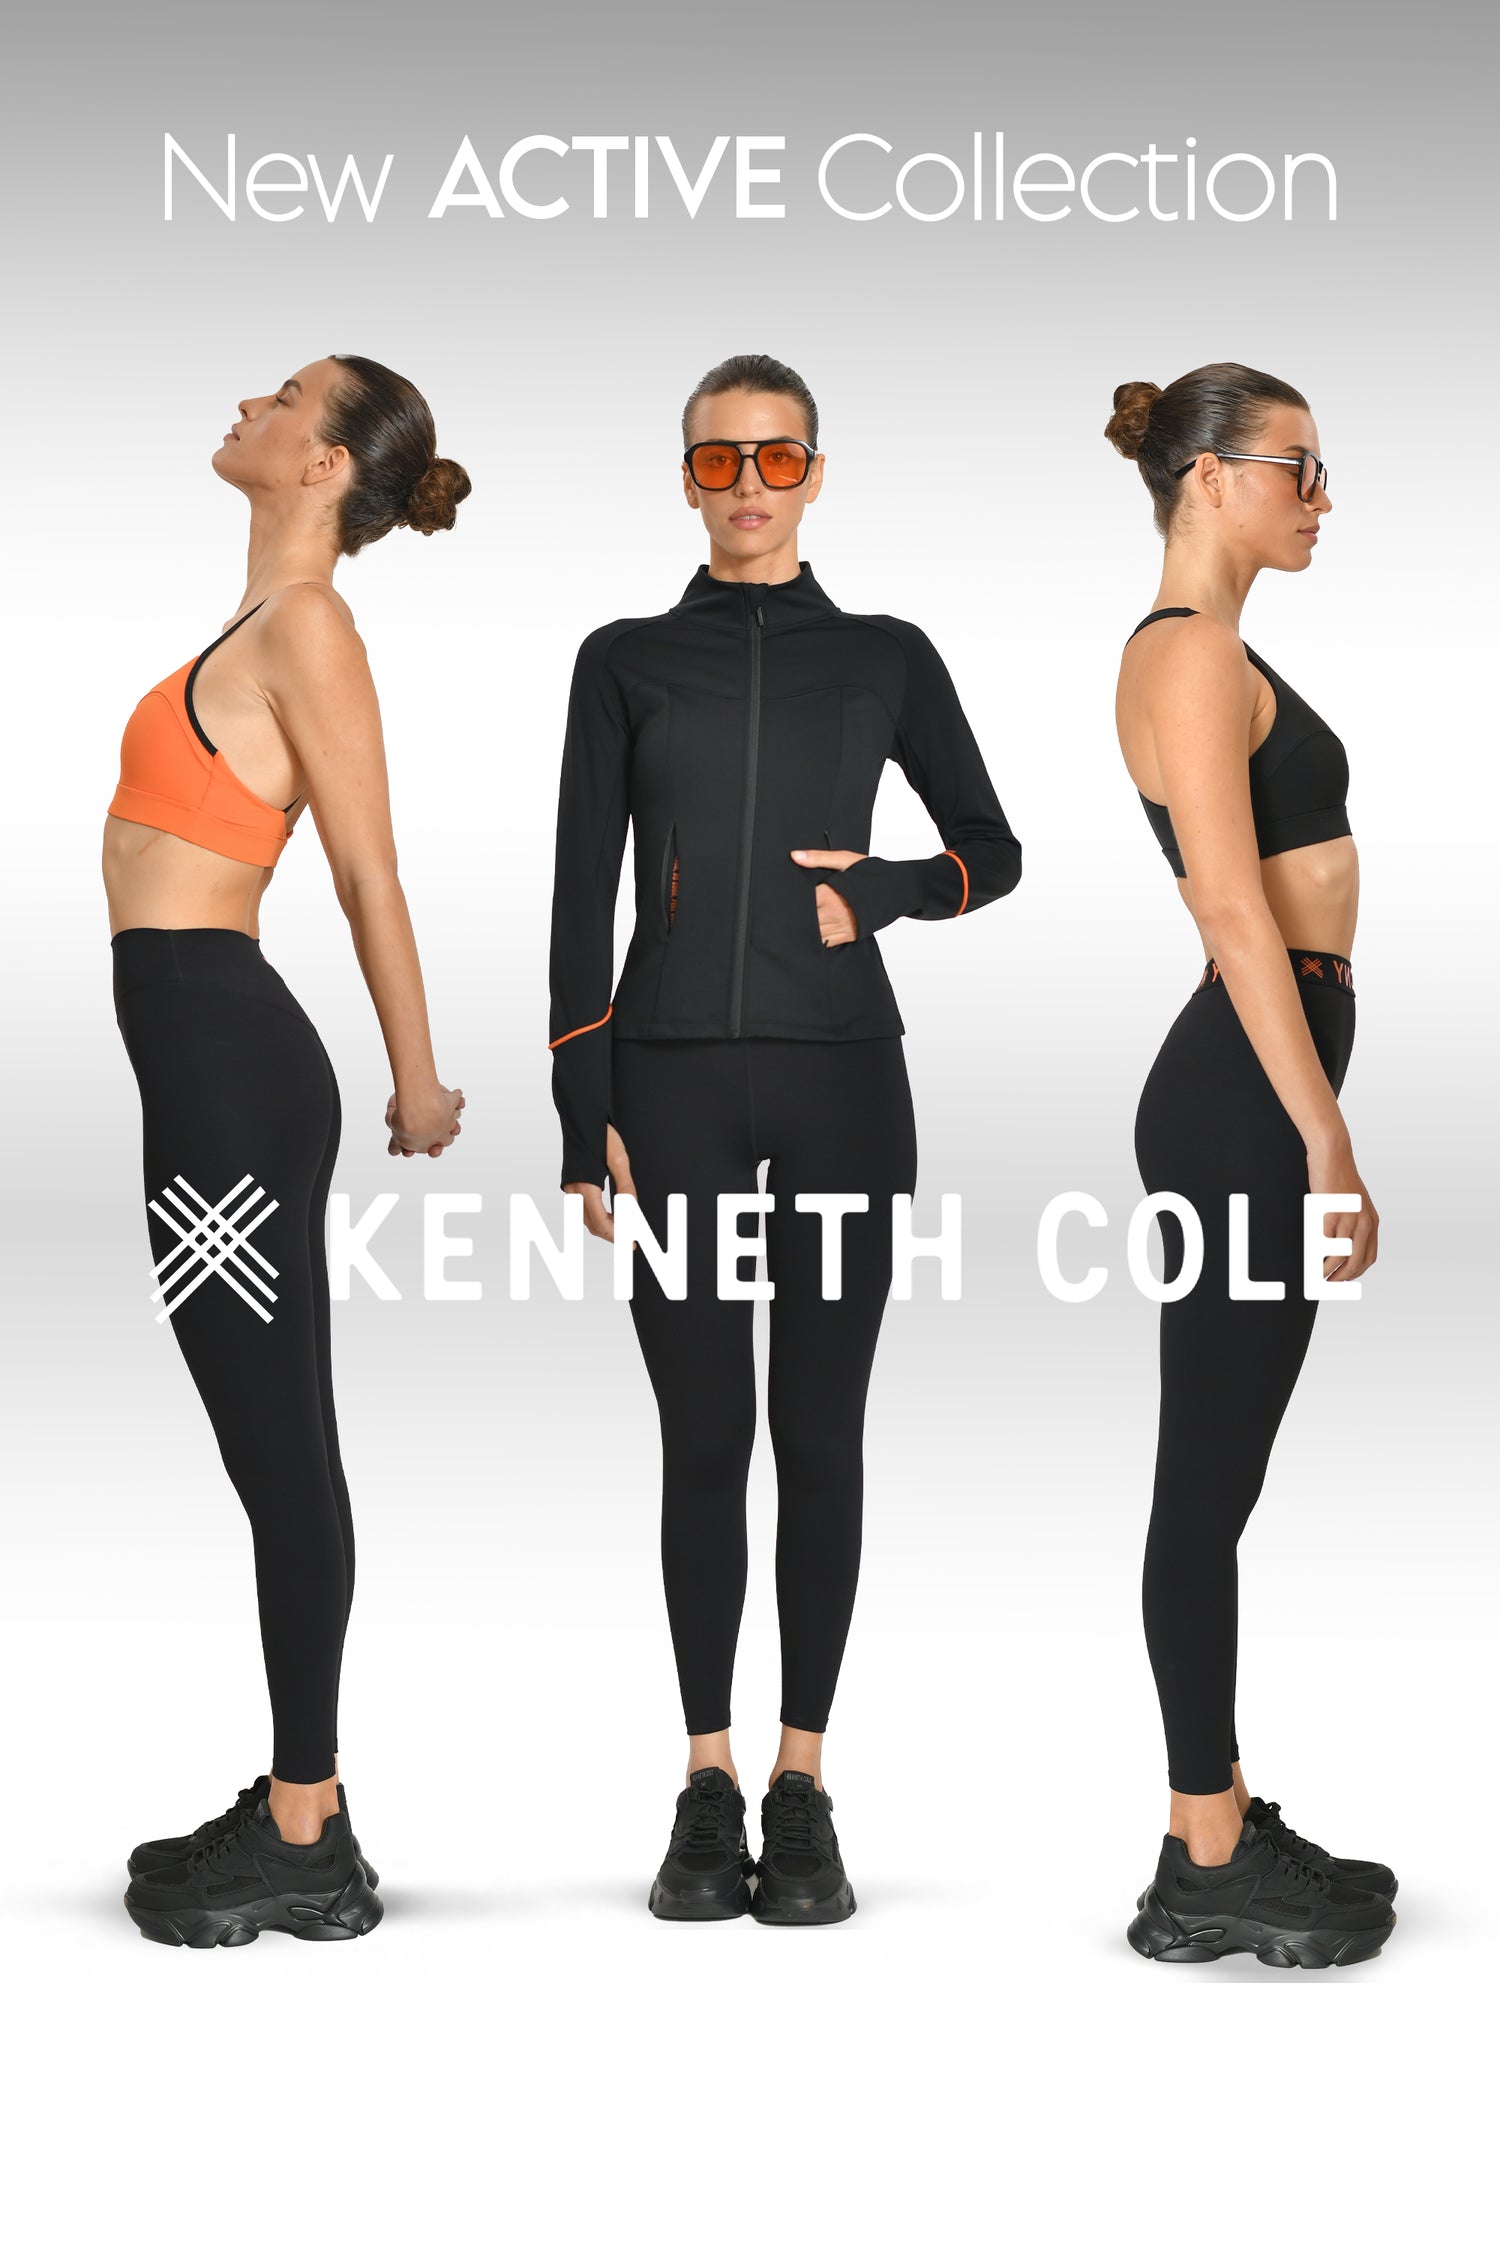 NEW ACTIVE COLLECTION KENNETH COLE